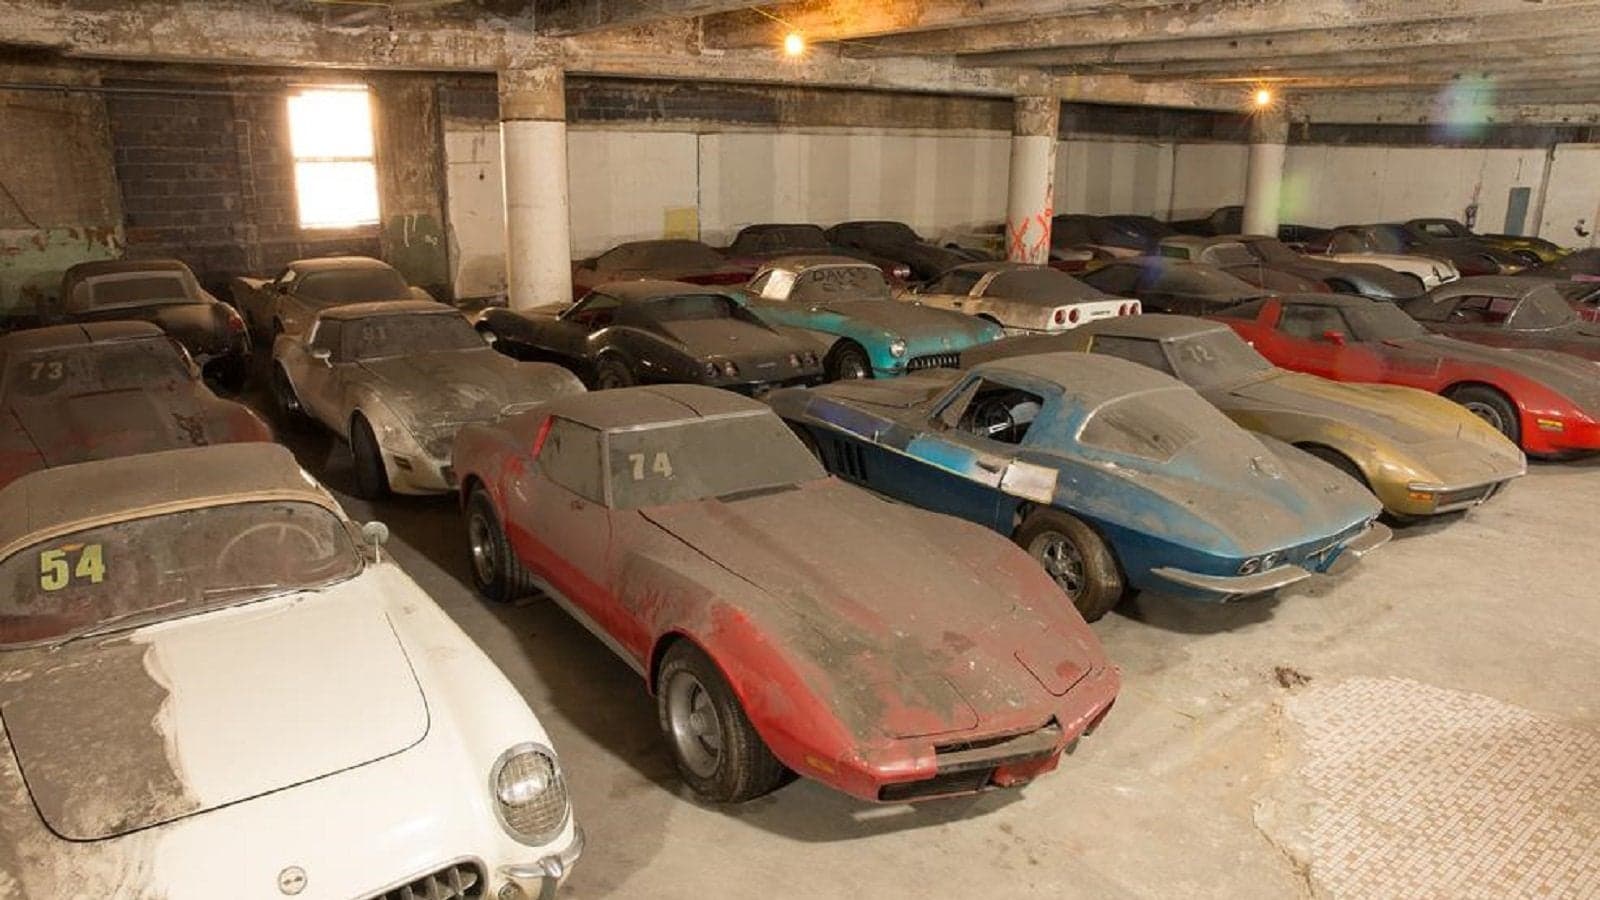 Historic Collection of 36 Forgotten Chevrolet Corvettes Will Be Raffled off for Charity